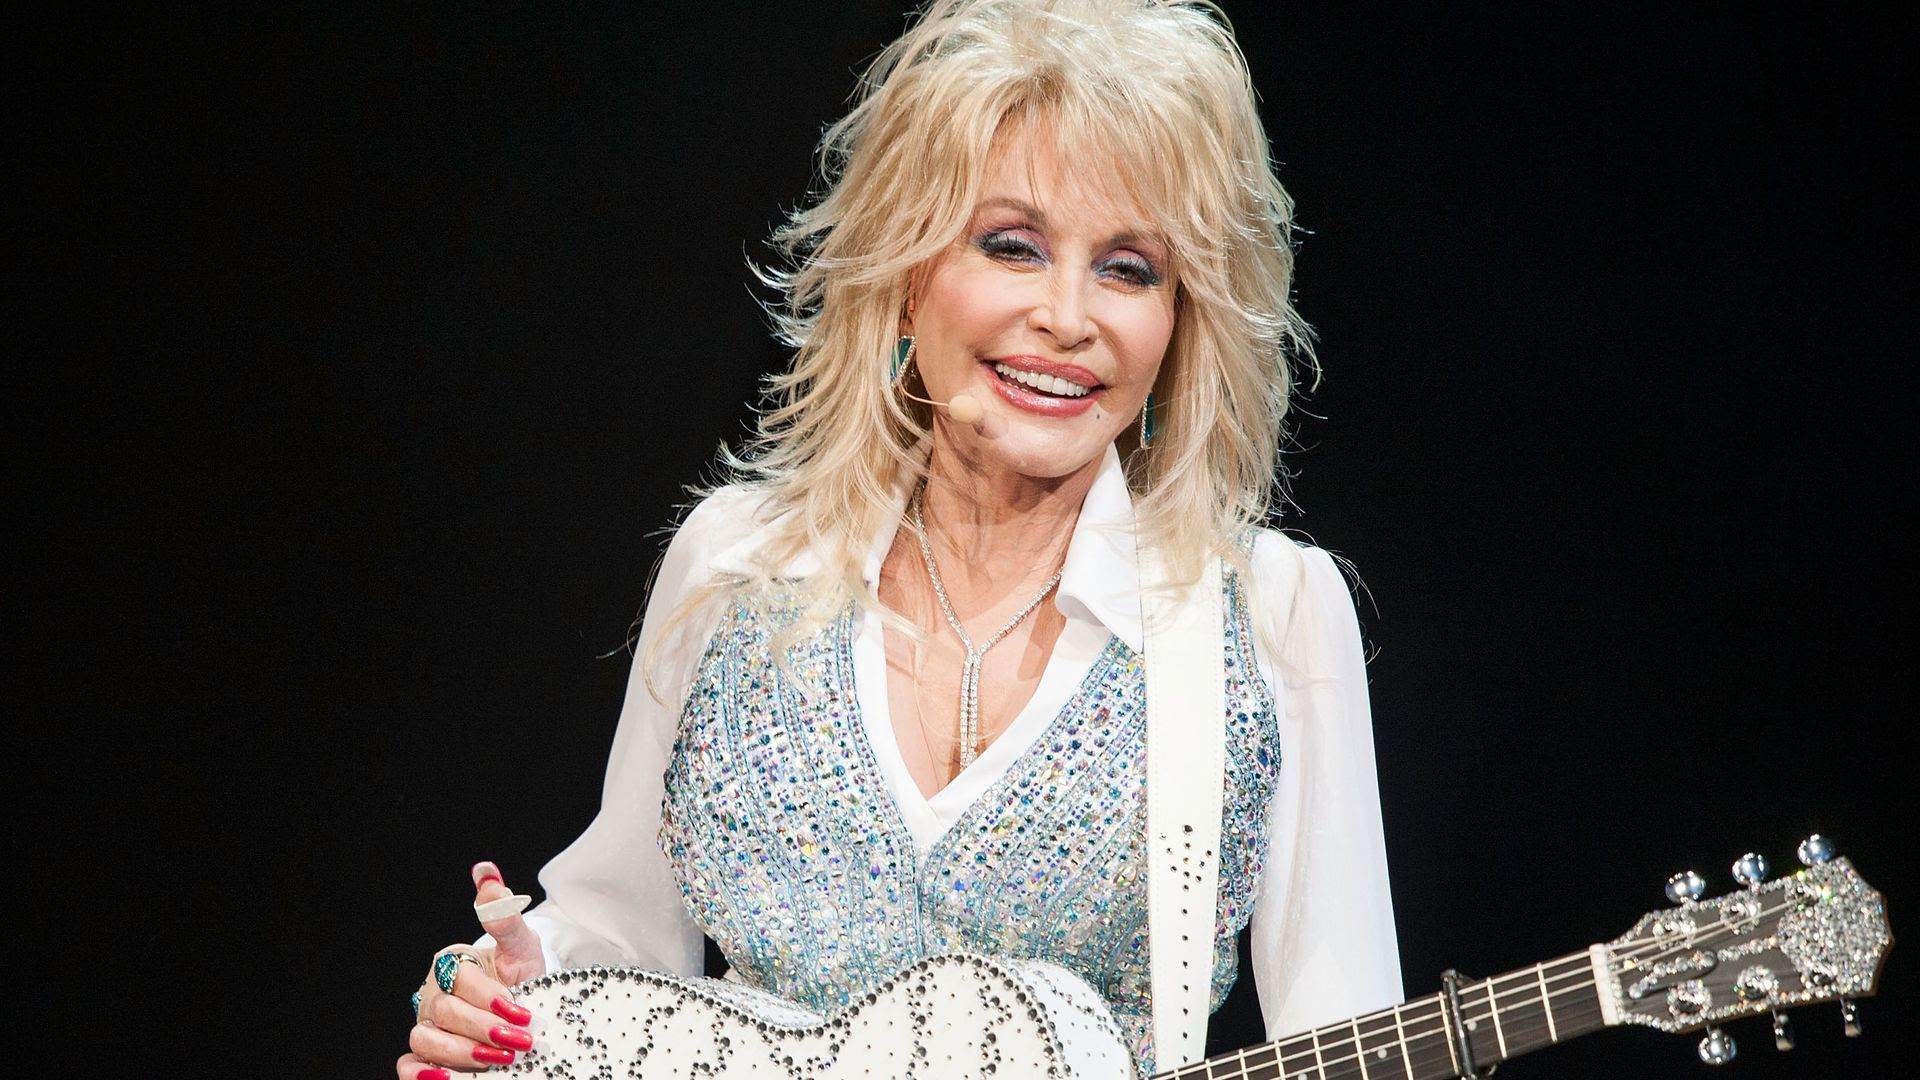 Dolly Parton on stage with a white guitar